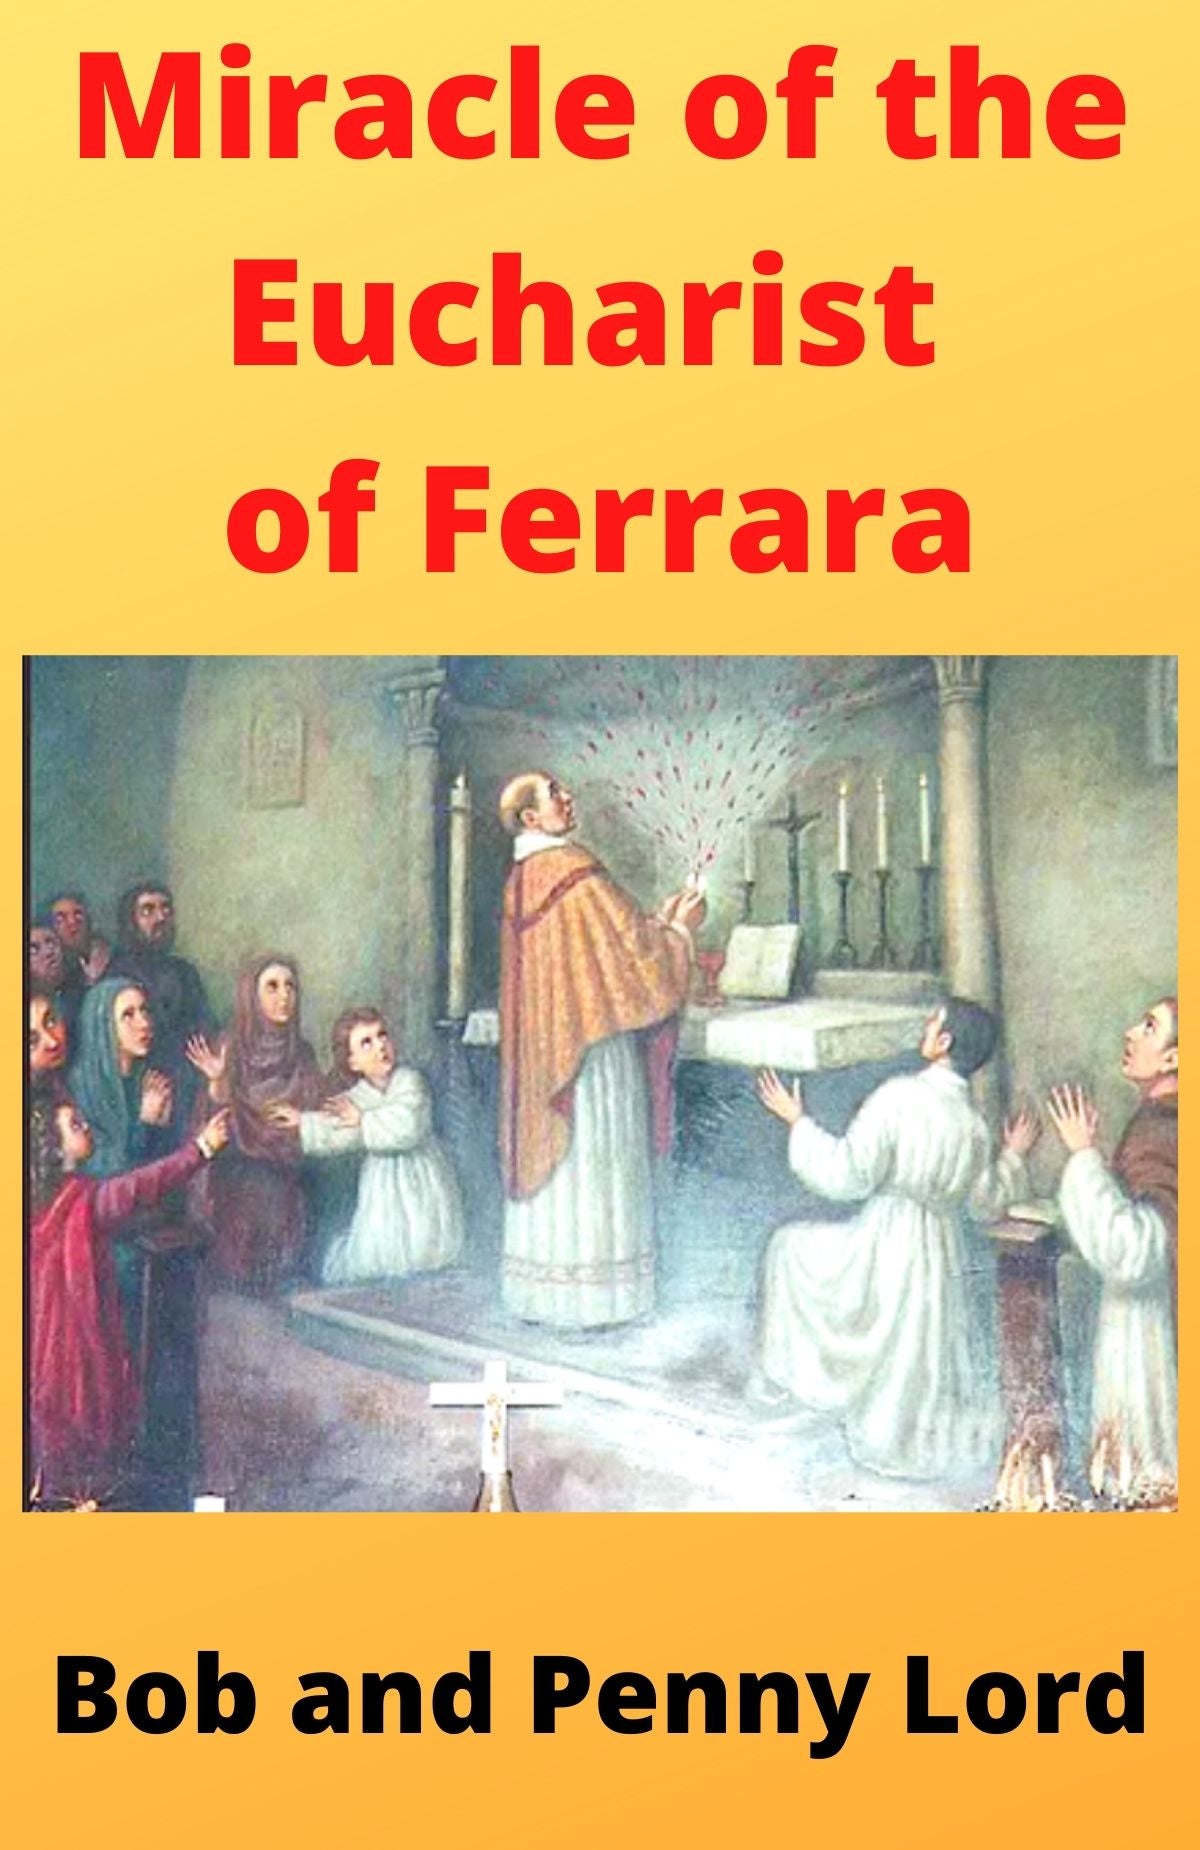 Miracles of the Eucharist Book 1 Audio - Bob and Penny Lord